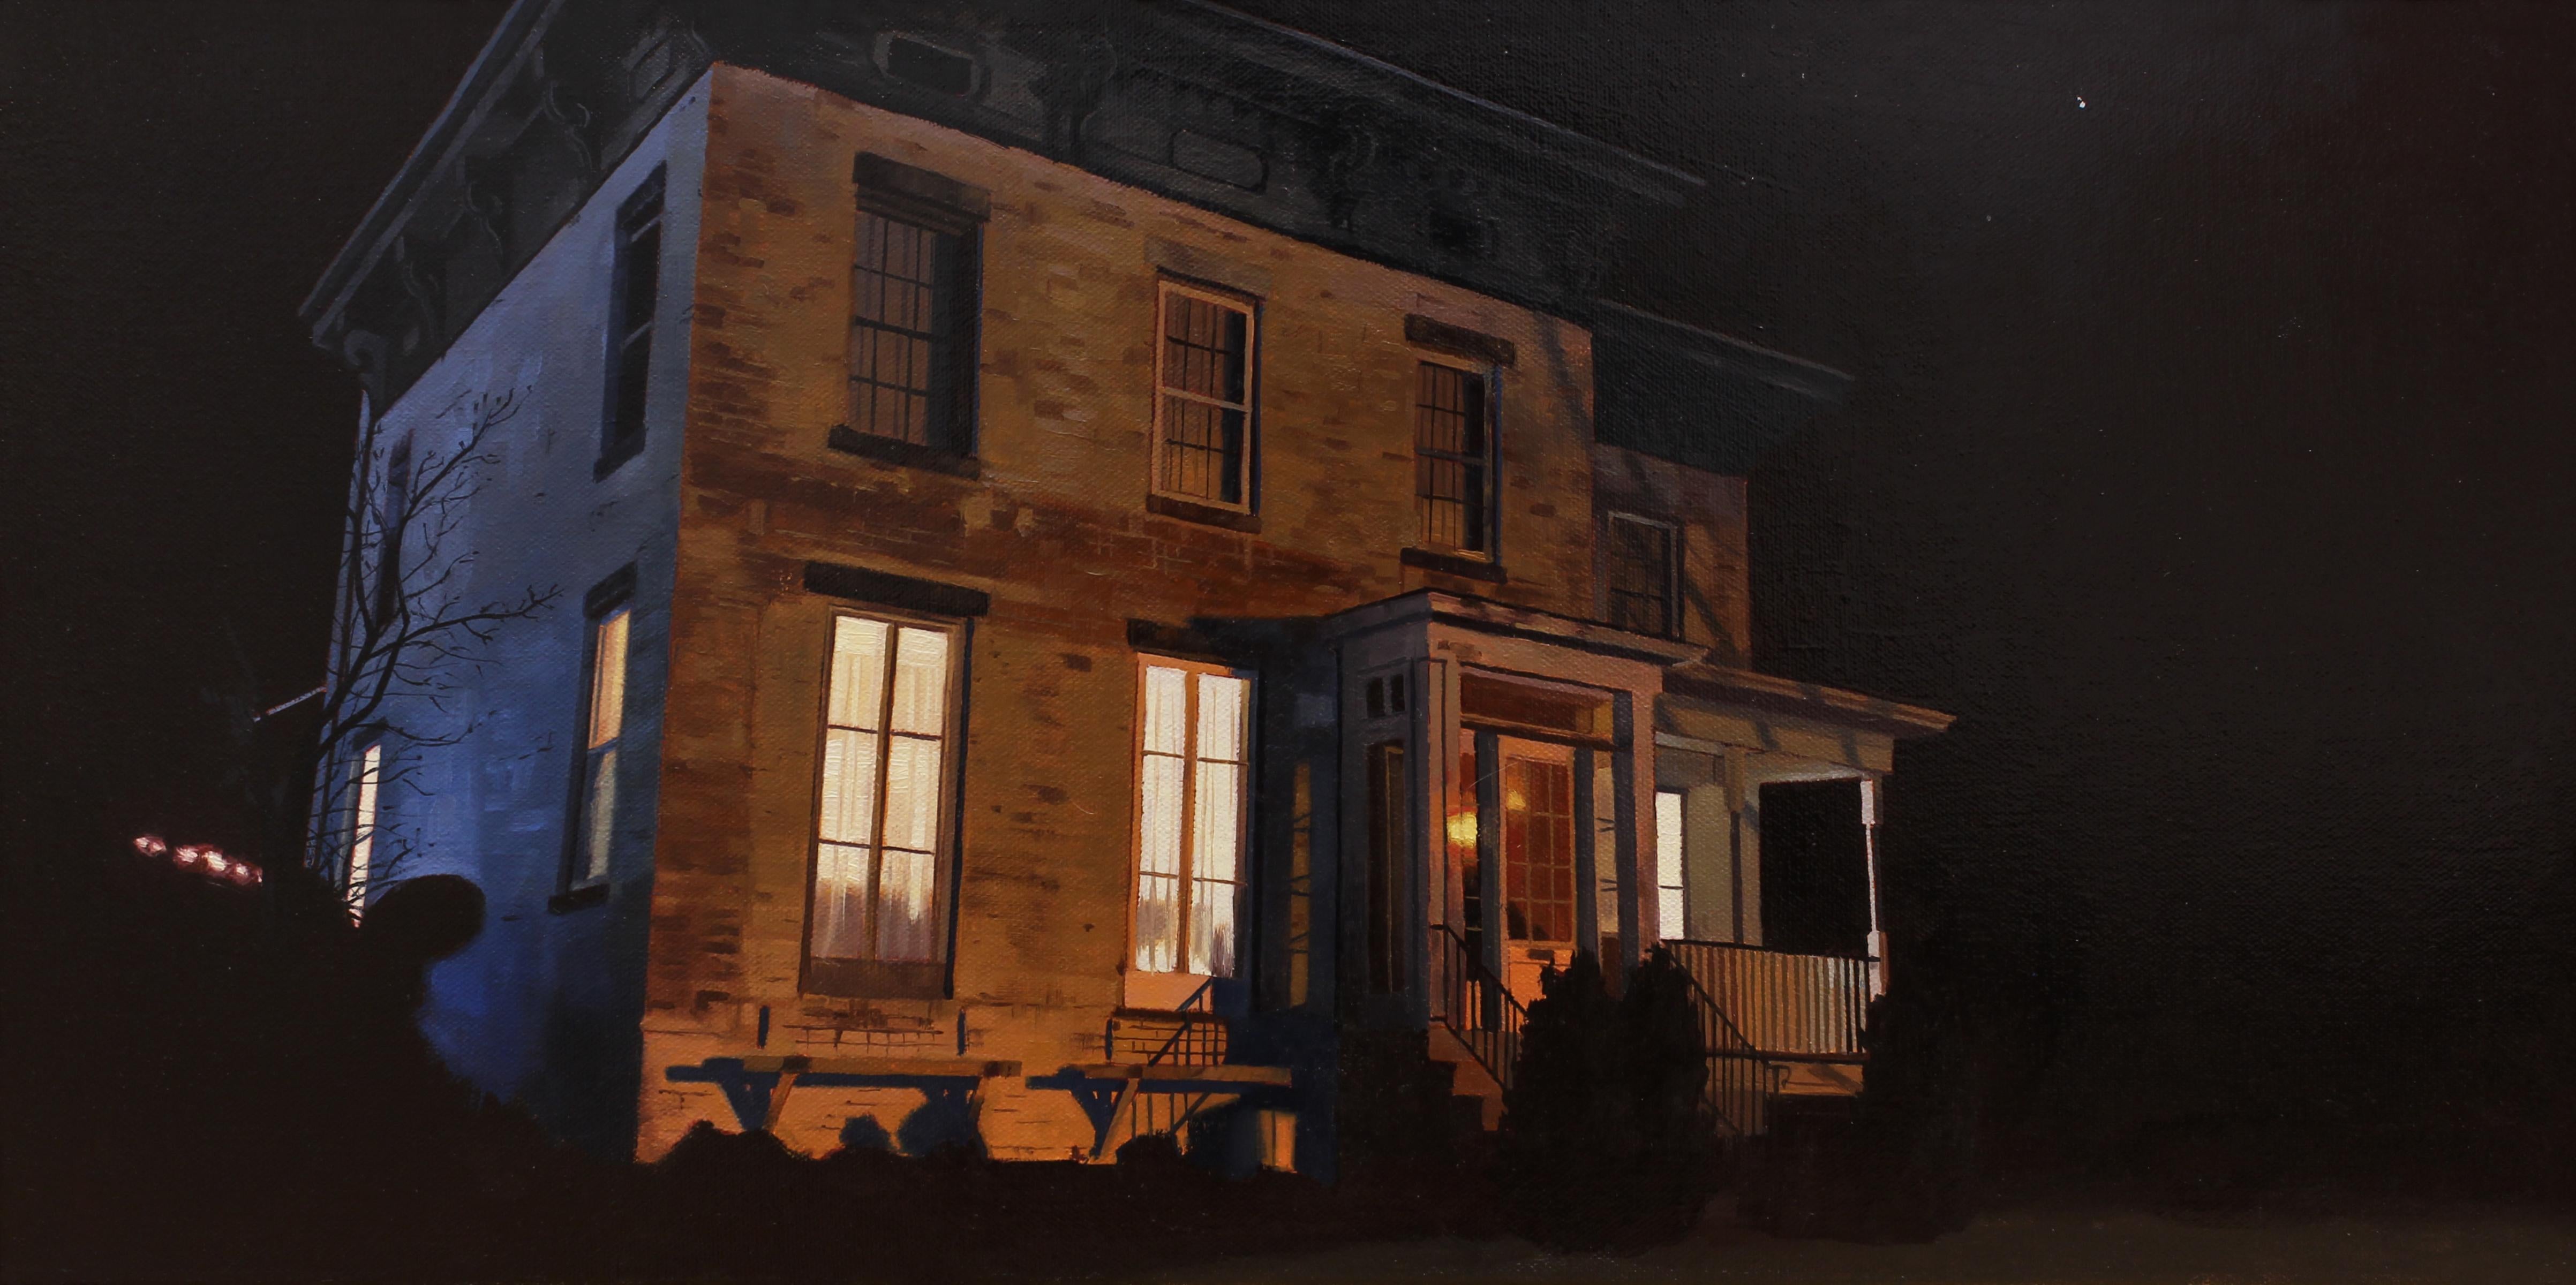 Richard Thomas Scott Landscape Painting - "Binary Star" - Nocturne - Architectural Painting - American Realism - Wyeth